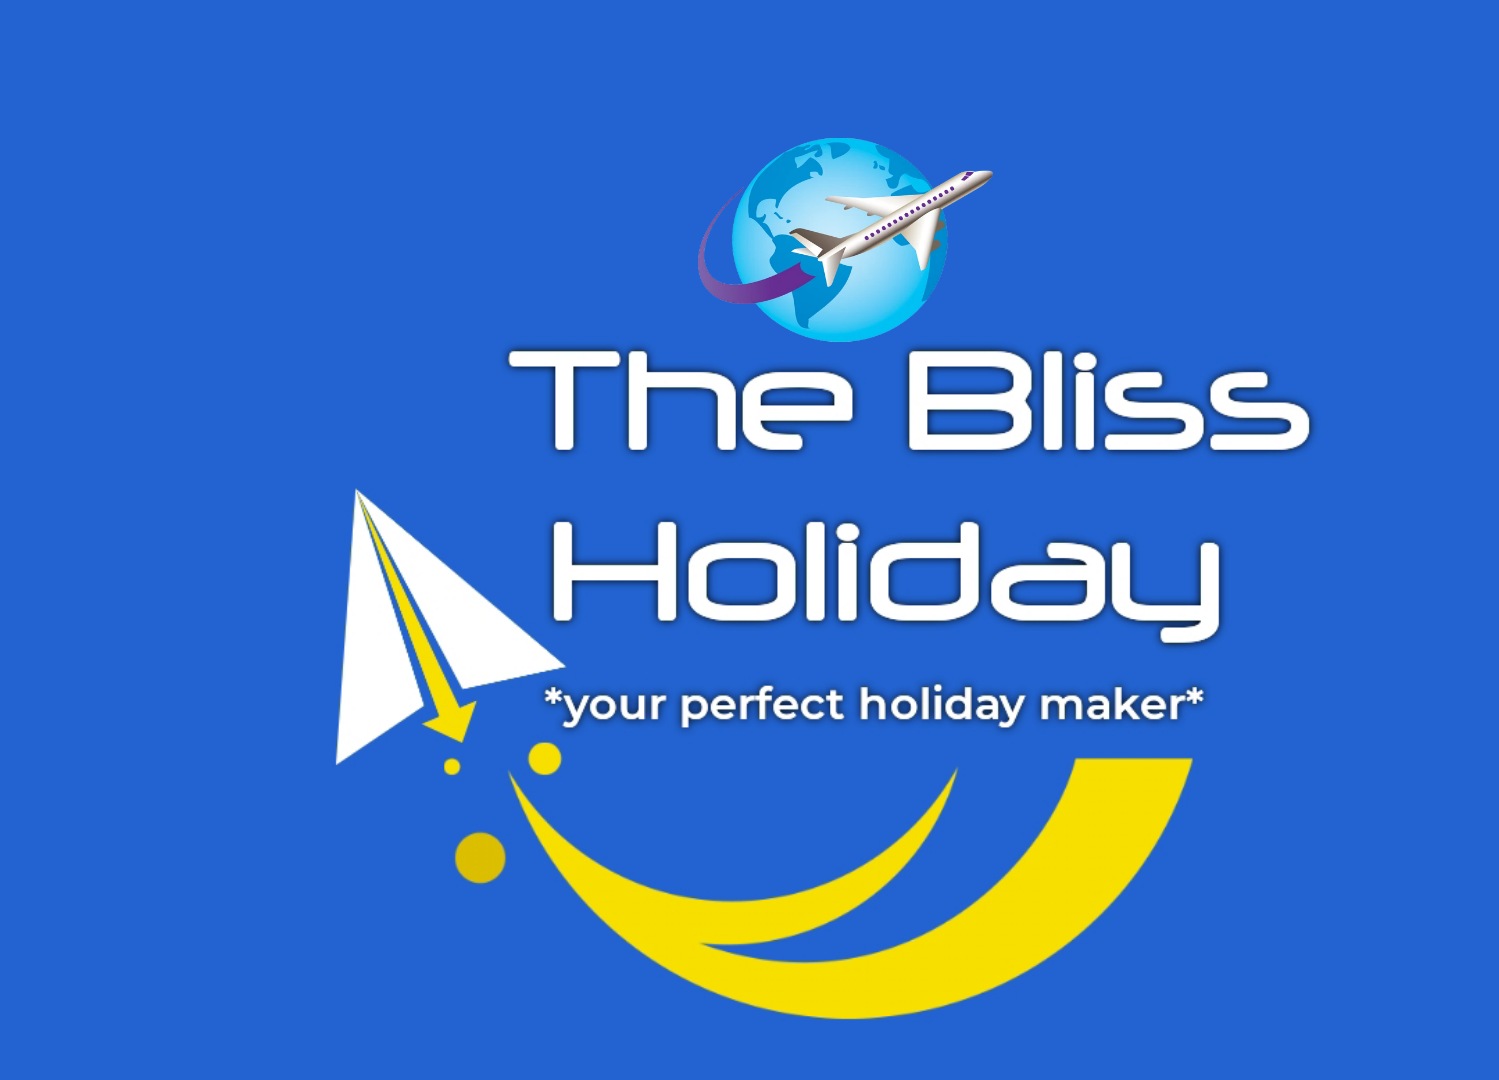 The Bliss Holiday